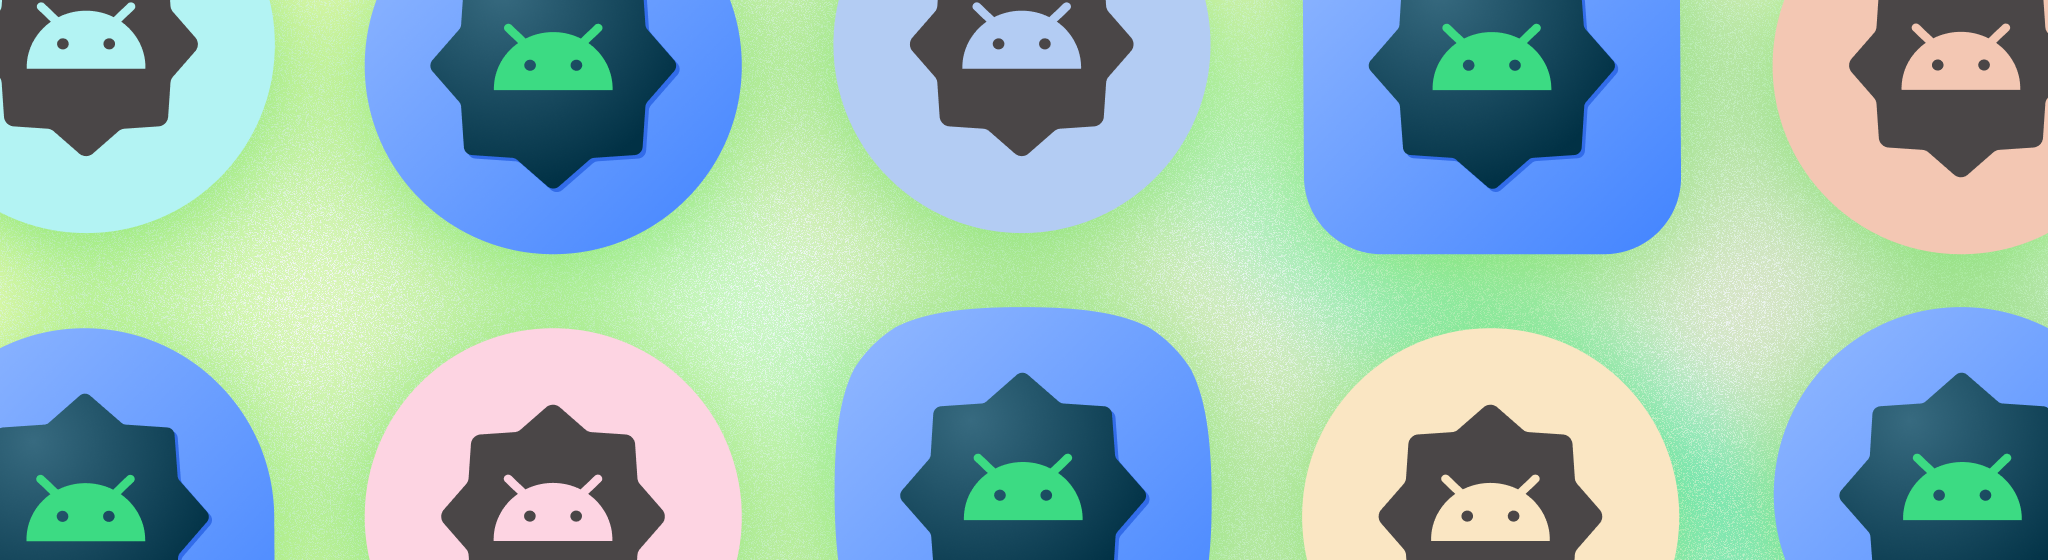 Adaptive icons | Android Developers